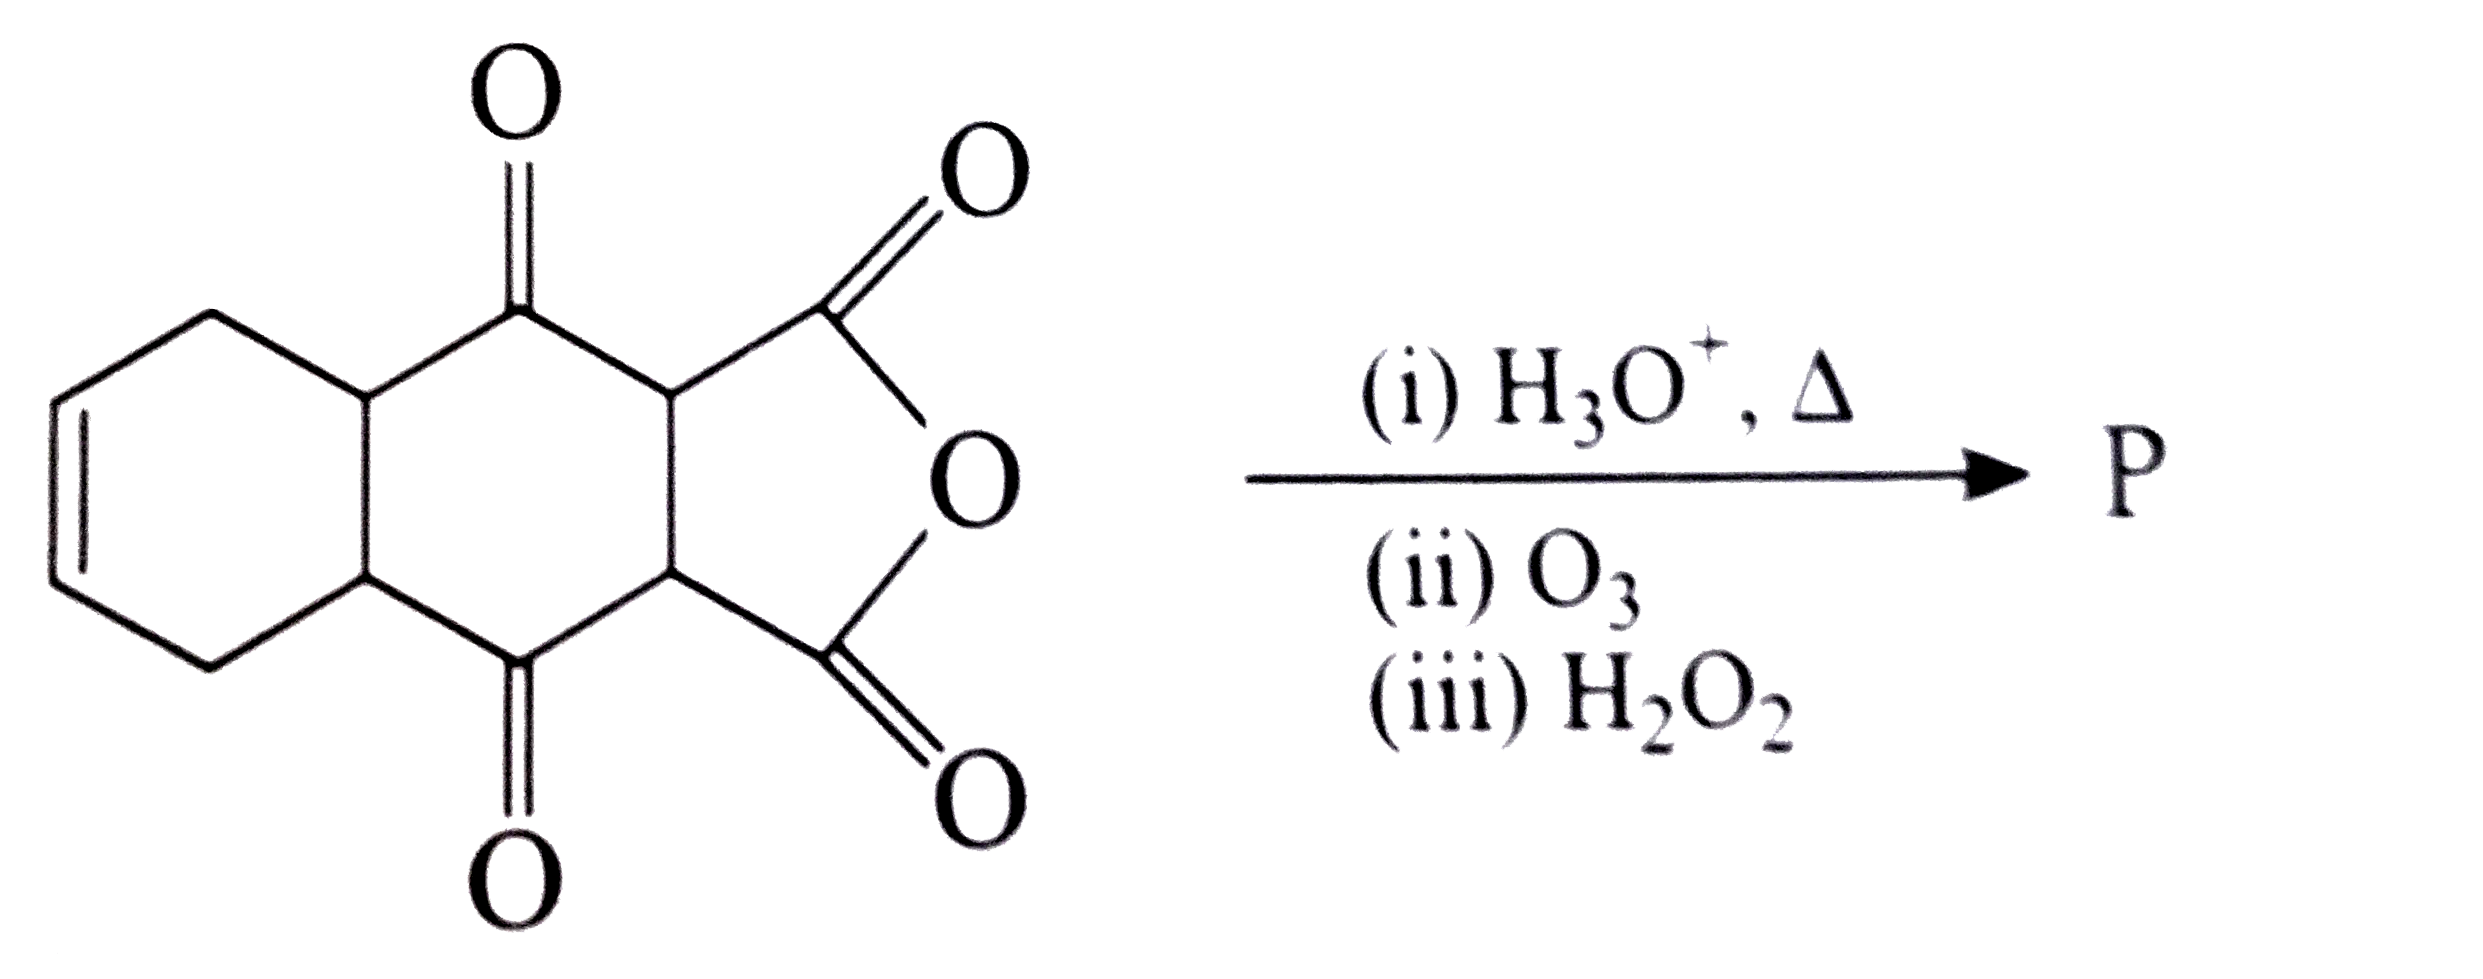 The total number of carboxylic acid groups in the product P is :